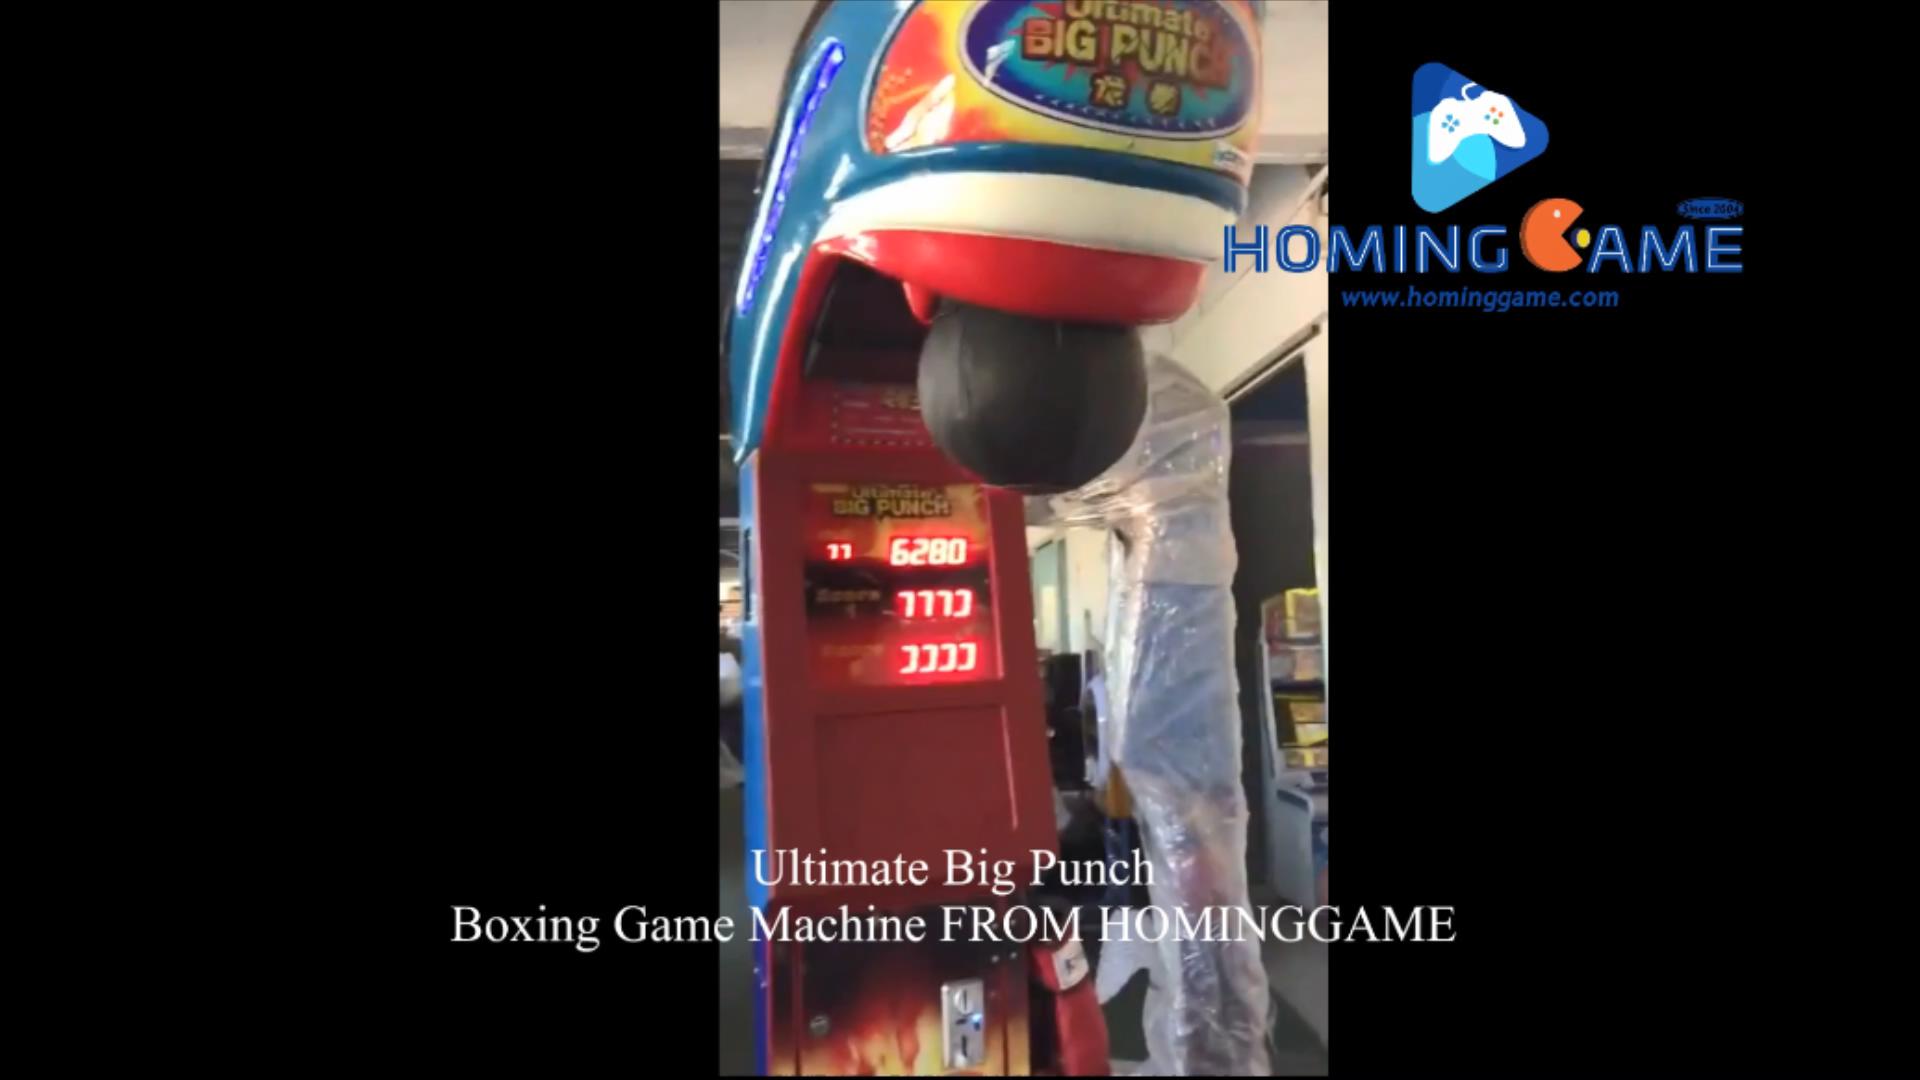 ultimate big punch boxing arcade game machine,ultimate big punch boxing game machine,boxing game machine,boxing arcade game machine,ultimate big punch game machine,boxing machine,boxing game,boxing arcade game,boxing redemption game machine,lutiamte big punch payout cocola prize game machine,boxing prize game machine,game machine,arcade game machine,coin operated game machine,indoor game machine,electrical game machine,amusement park game equipment,game equipment,amusement machine,entertainment game machine,family entertainment game machine,sports game,sports game machine,redemption game machine,lottery game machine,prize game machine,boxing arcade,hominggame,www.gametube.hk,hominggame game machine,hominggame boxing machine,ultimate big punch boxing arcade game